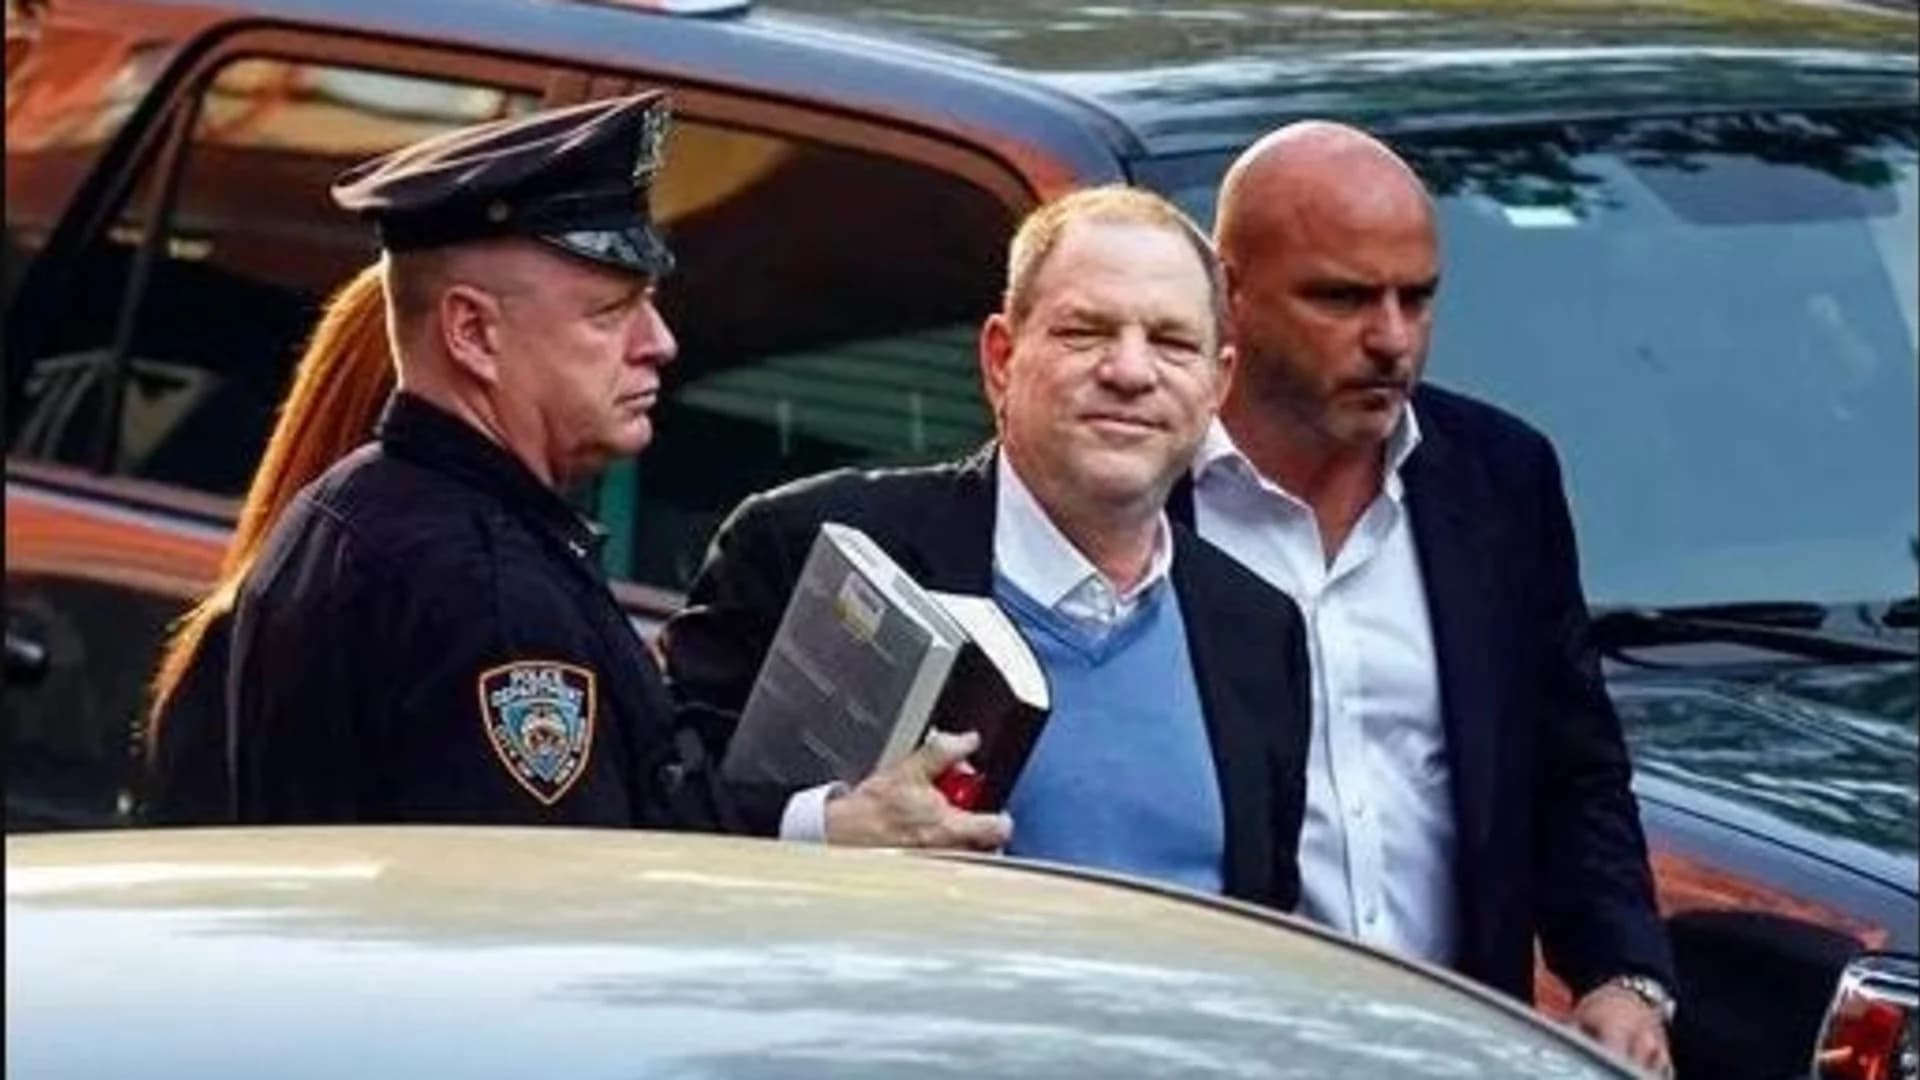 Handcuffed Weinstein faces rape charge in #MeToo reckoning